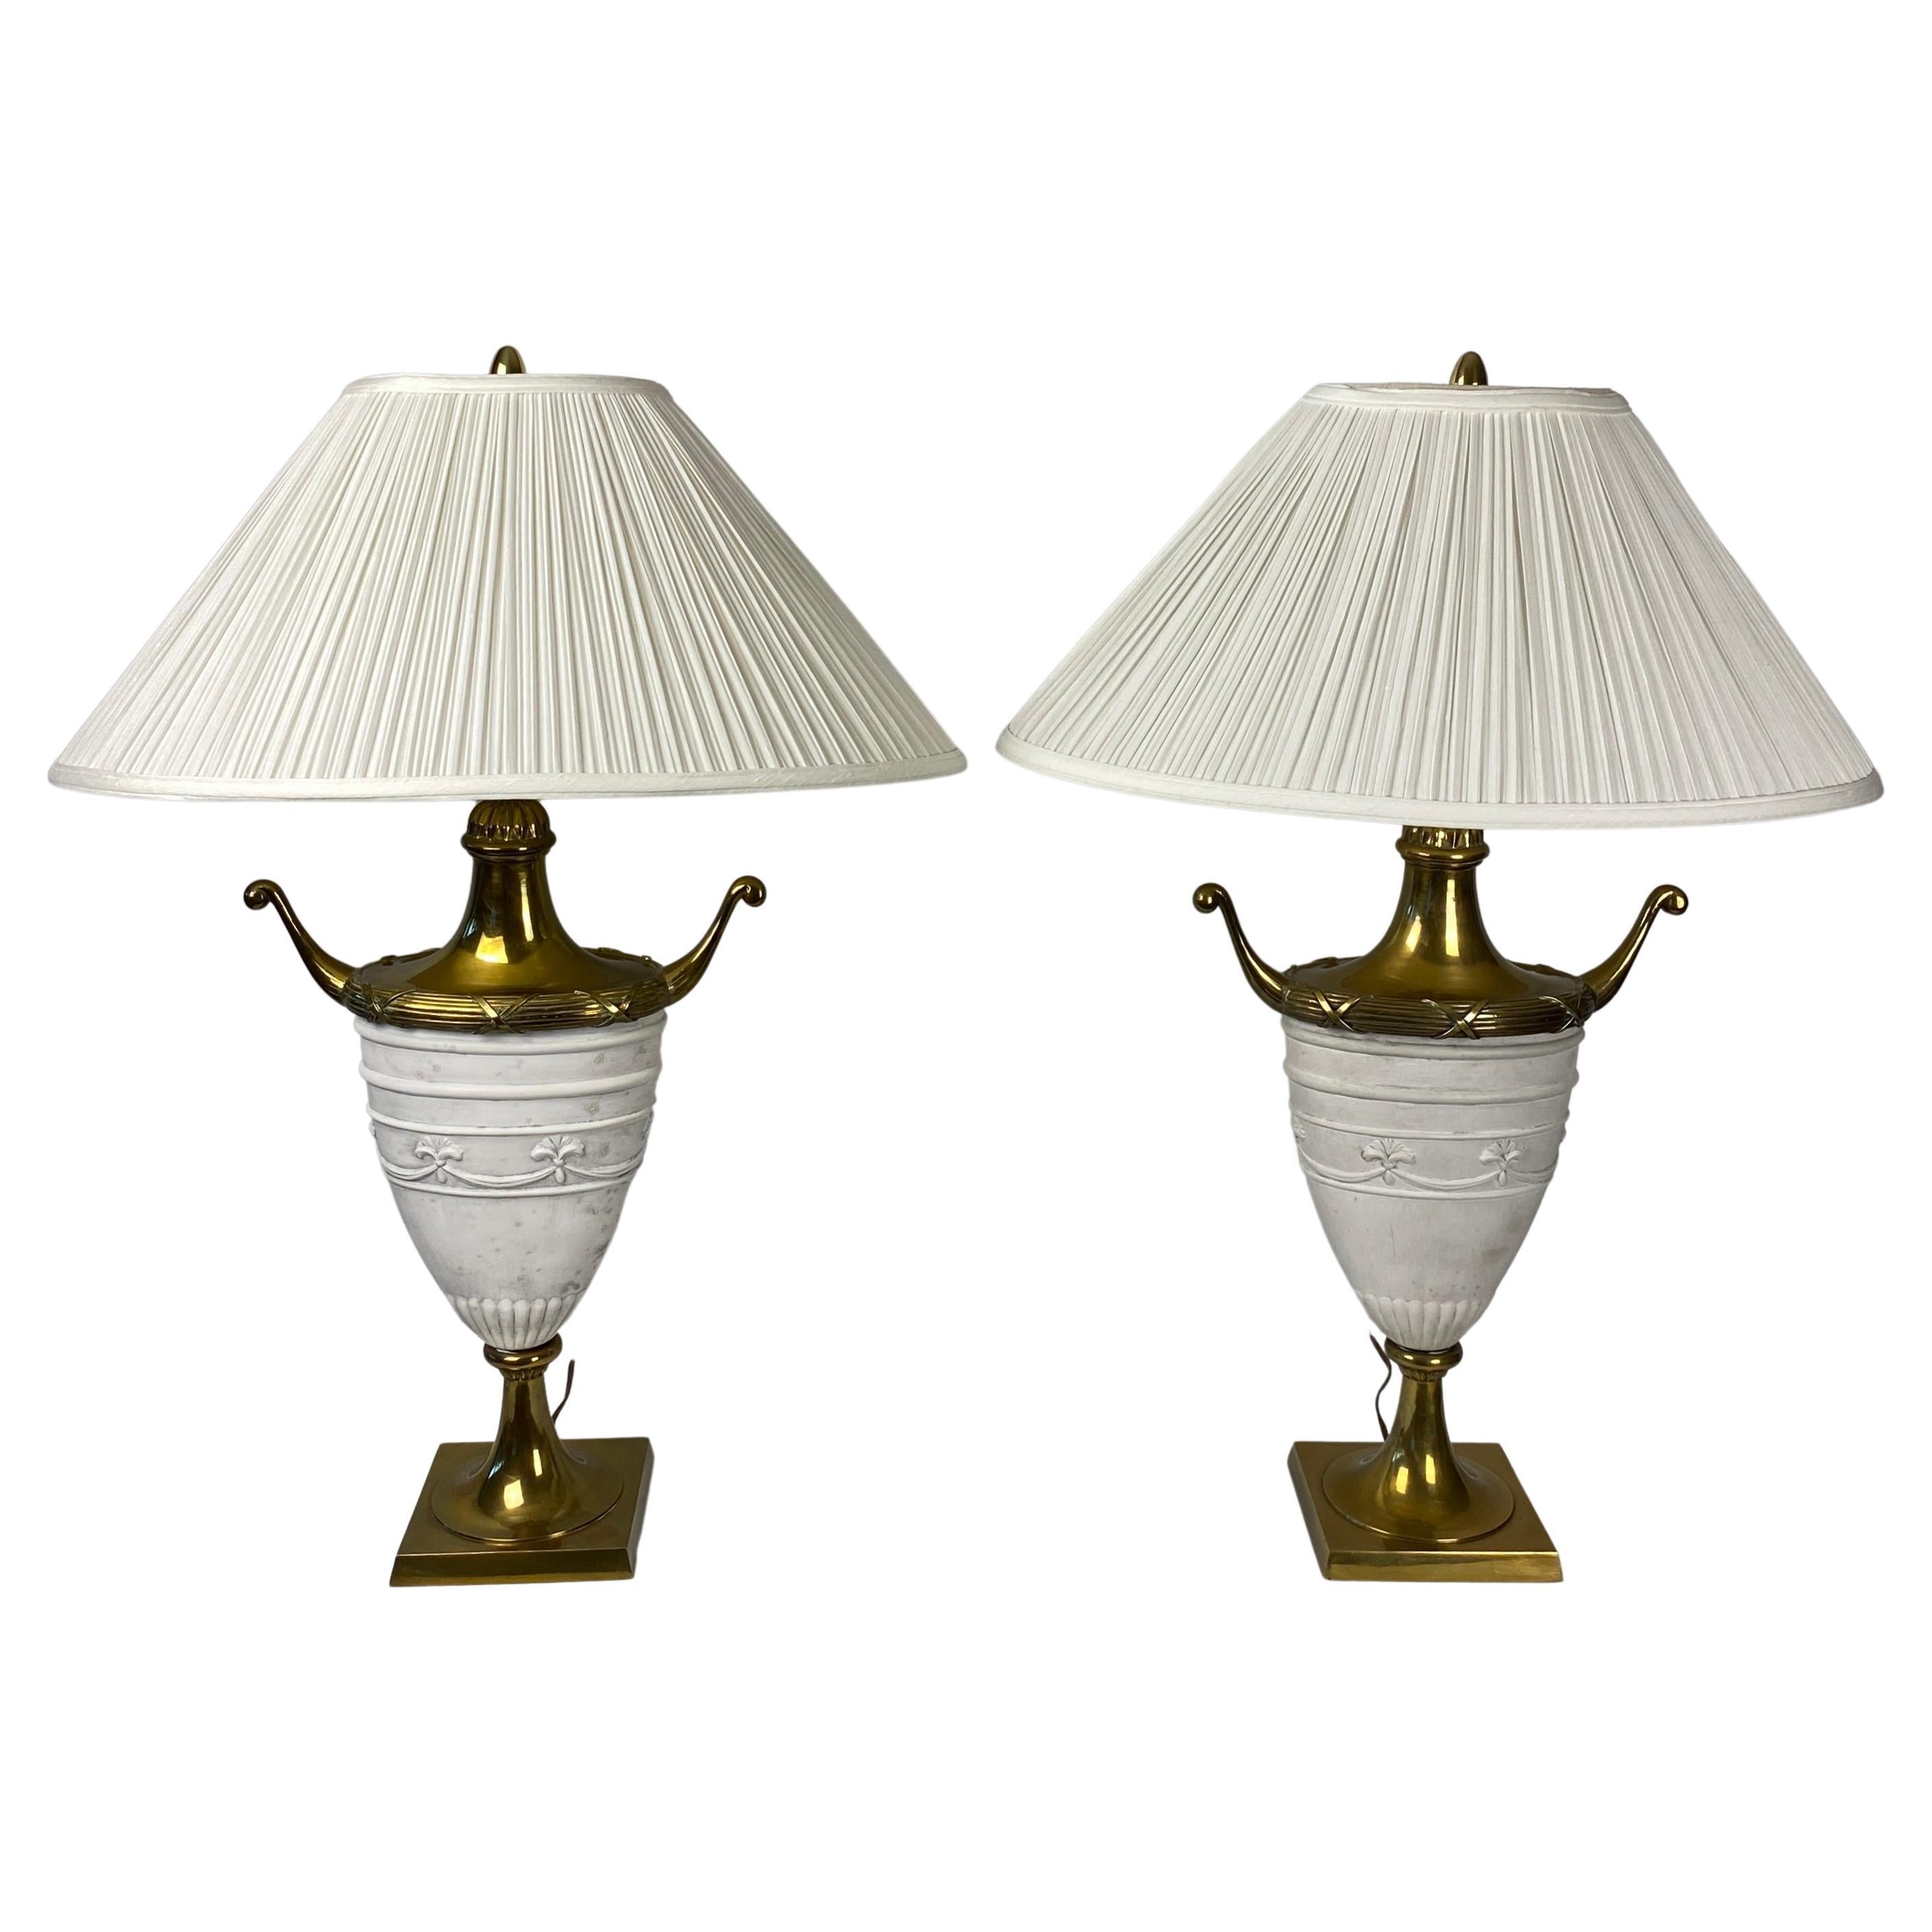 Pair of Italian Urn Shaped Table Lamps Antique White with Bronze and Brass